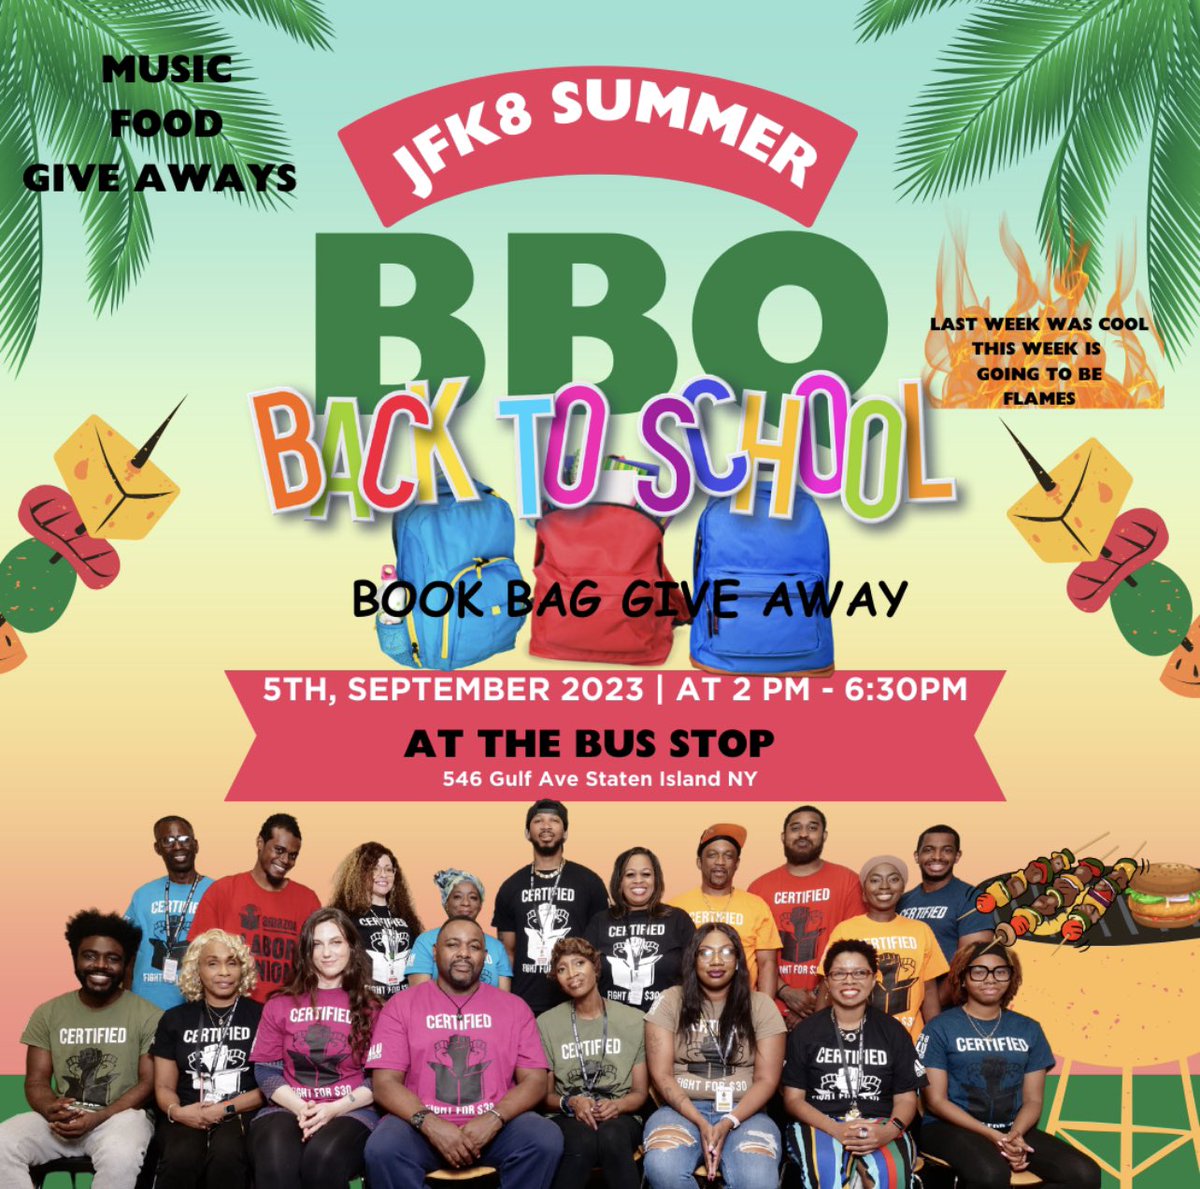 BACK TO SCHOOL Giveaway TODAY!! @ JFK8 Amazon our final BBQ of the summer @amazonlabor see you there! #Hotlaborsummer ✊🏽